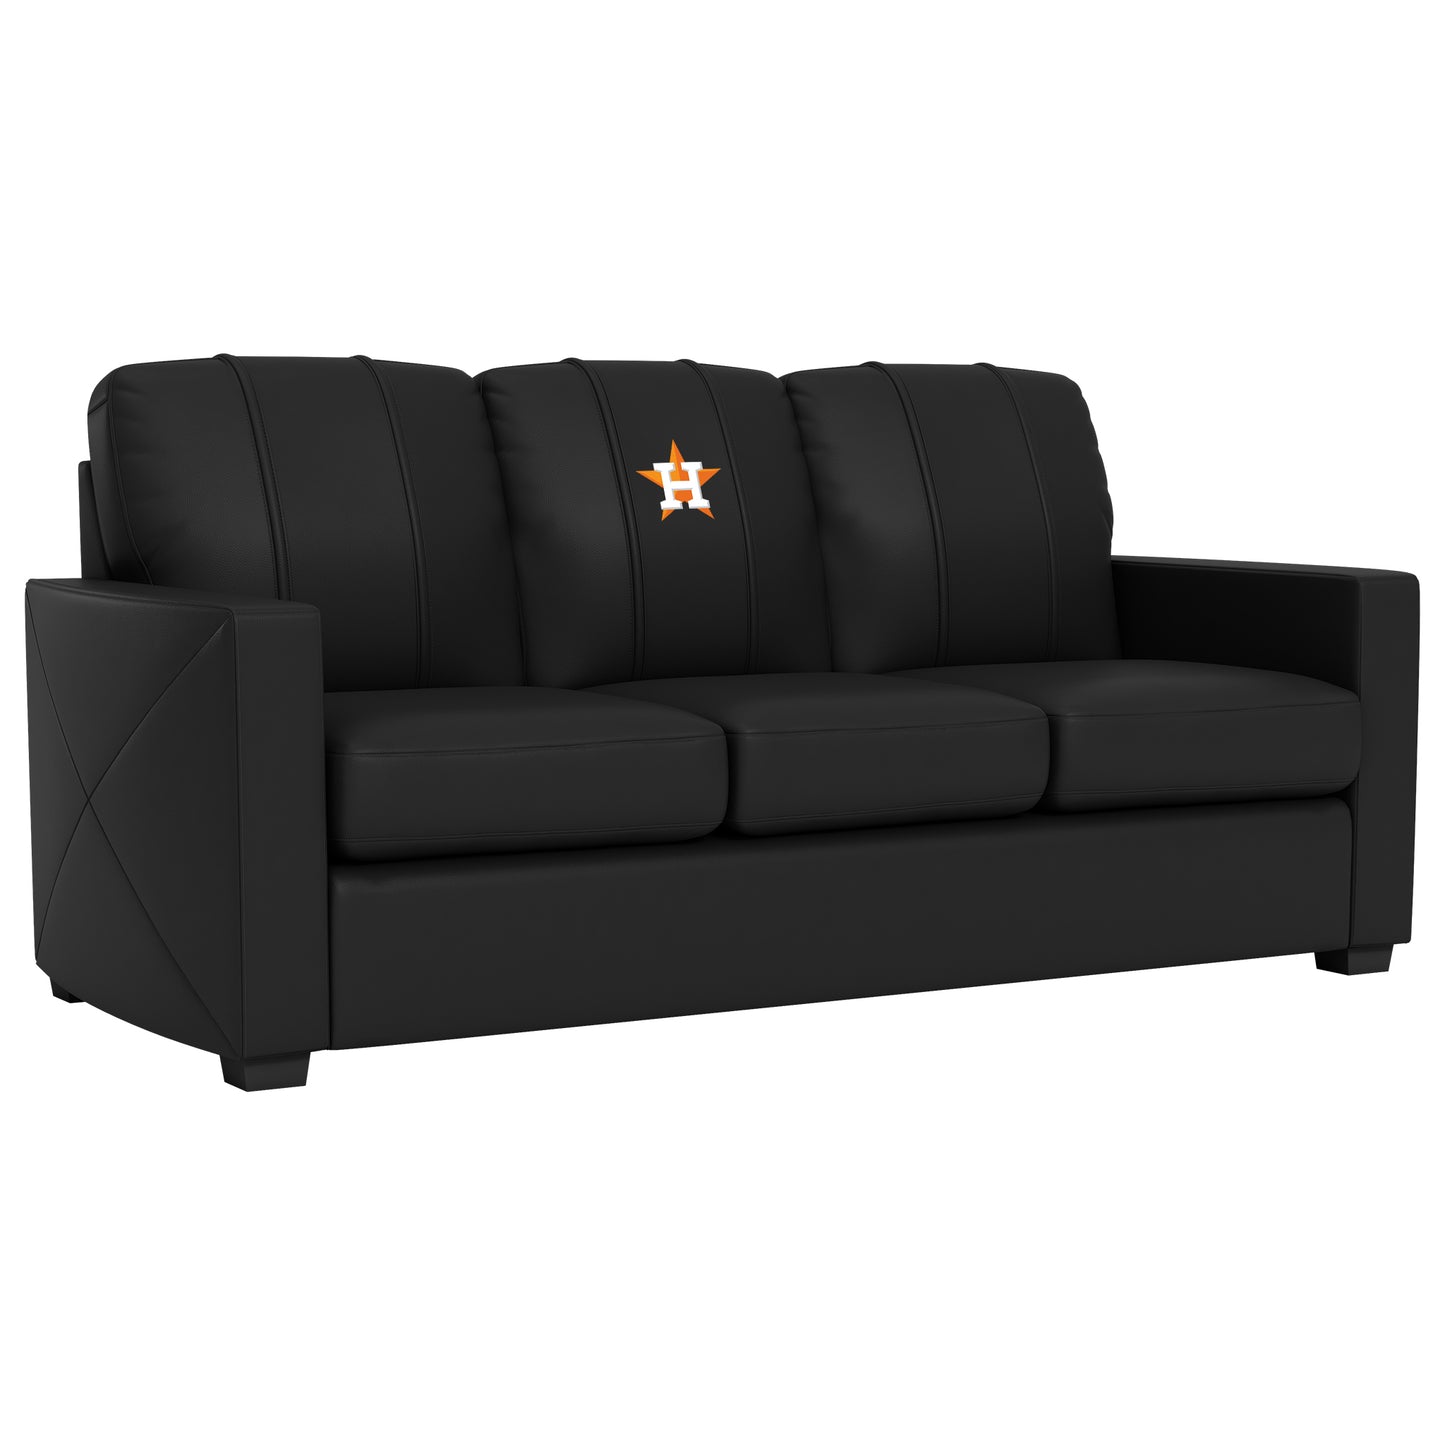 Silver Sofa with Houston Astros Secondary